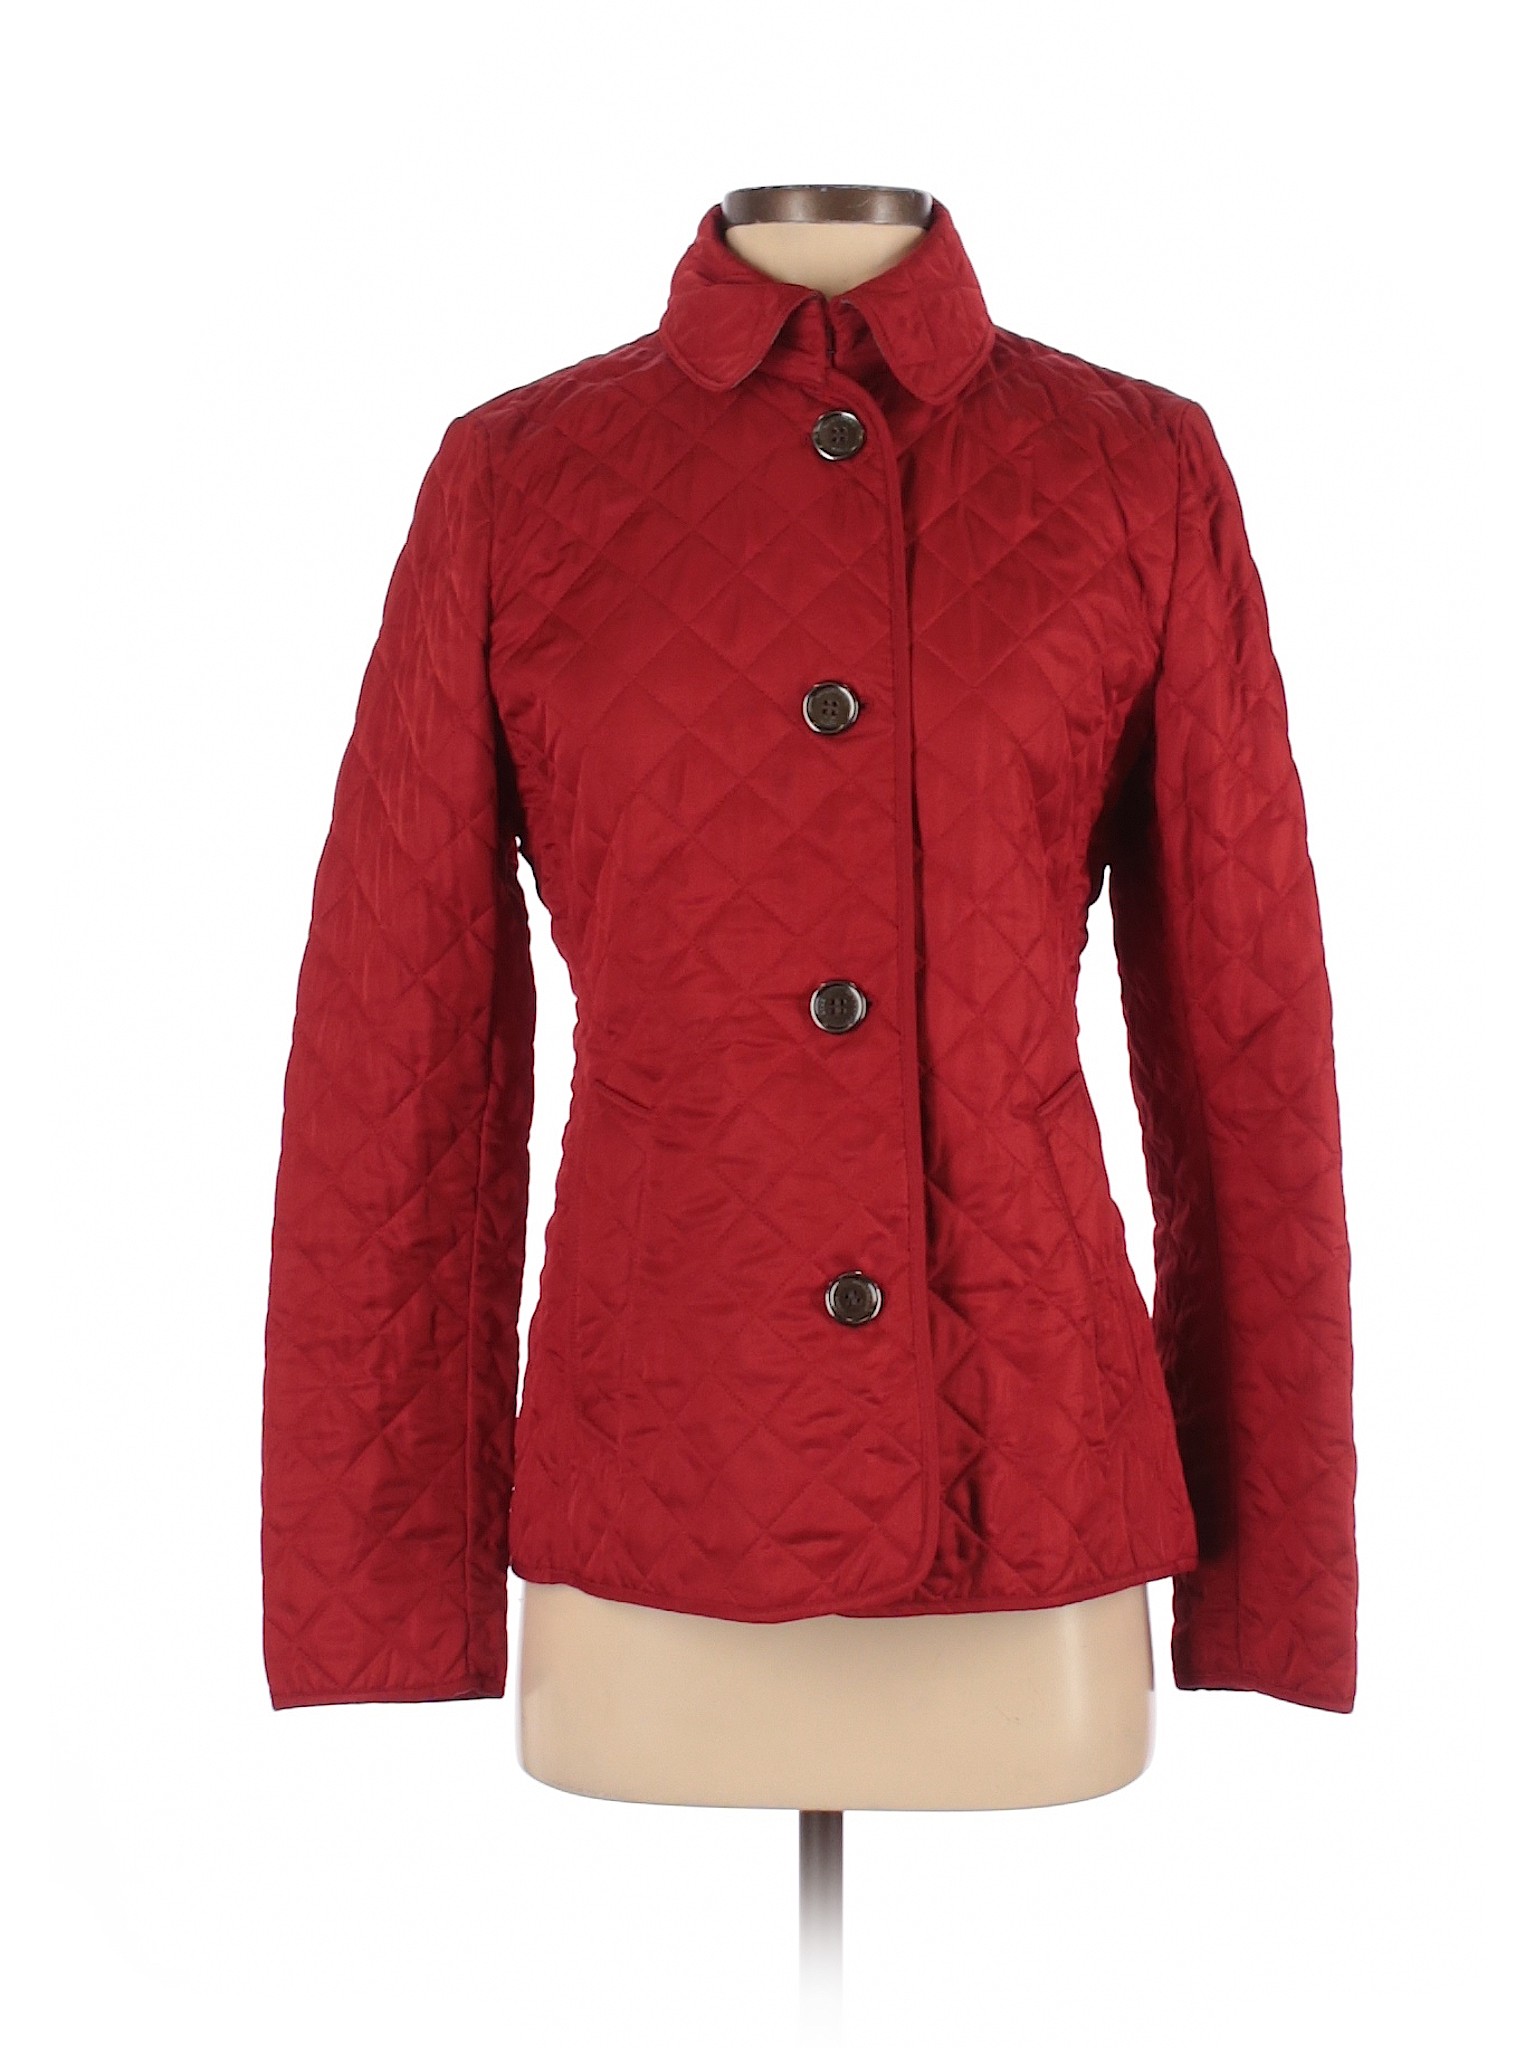 burberry red jacket womens